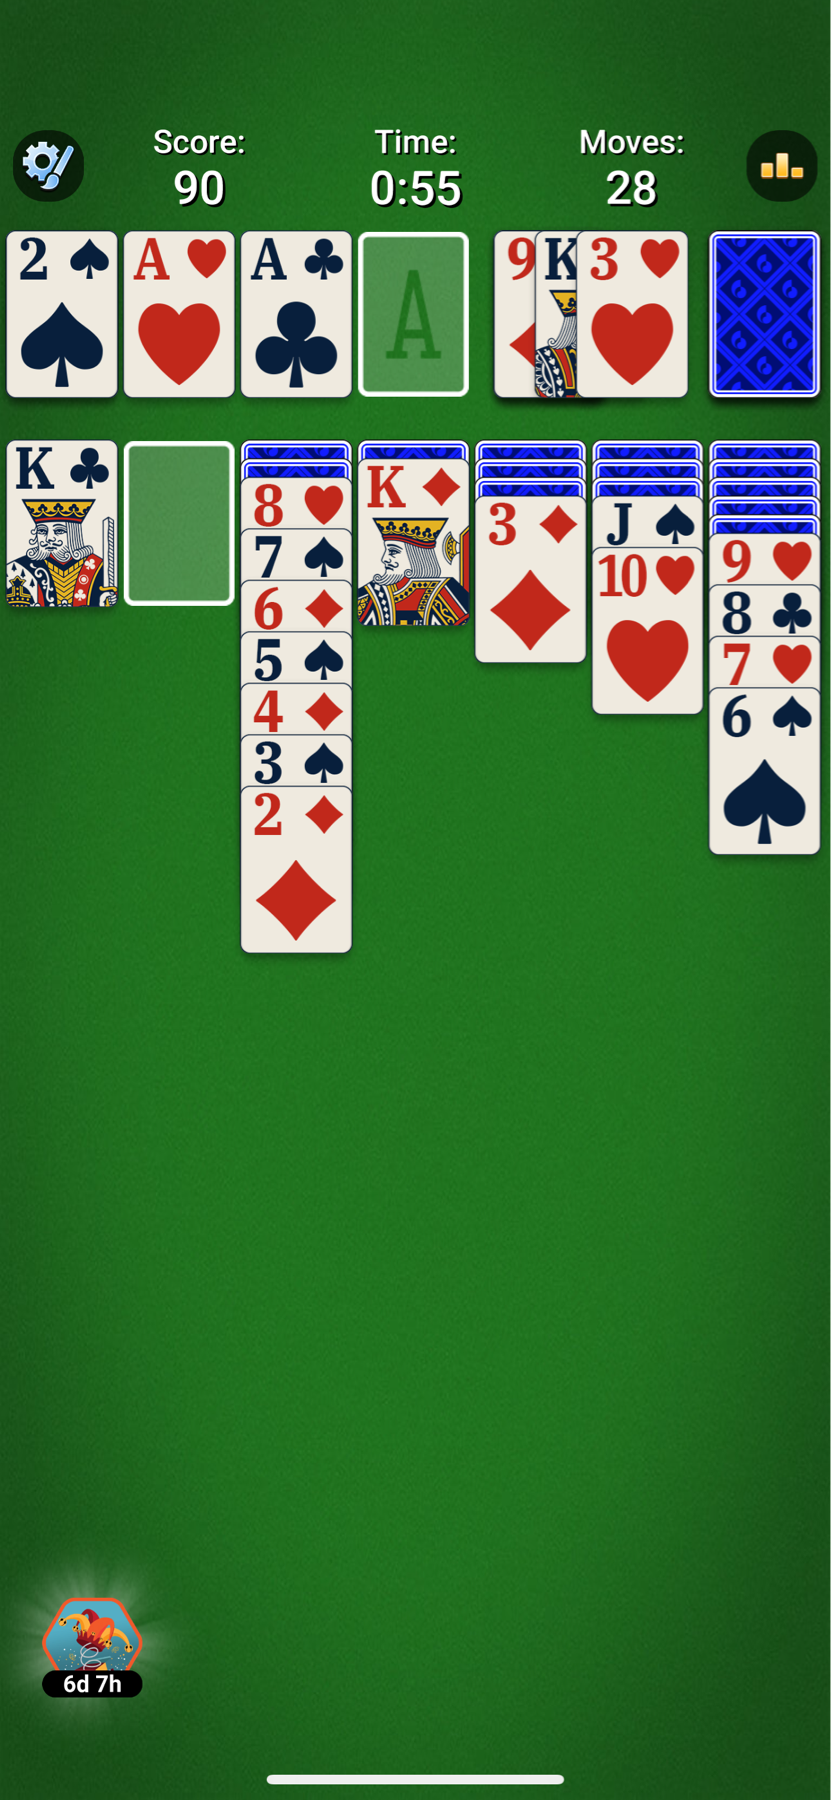 Solitaire card game screen with the score, time, and number of moves displayed at the top. The layout shows seven columns of cards, some face-up and arranged in descending order, and a deck with remaining cards at the top right. Four empty